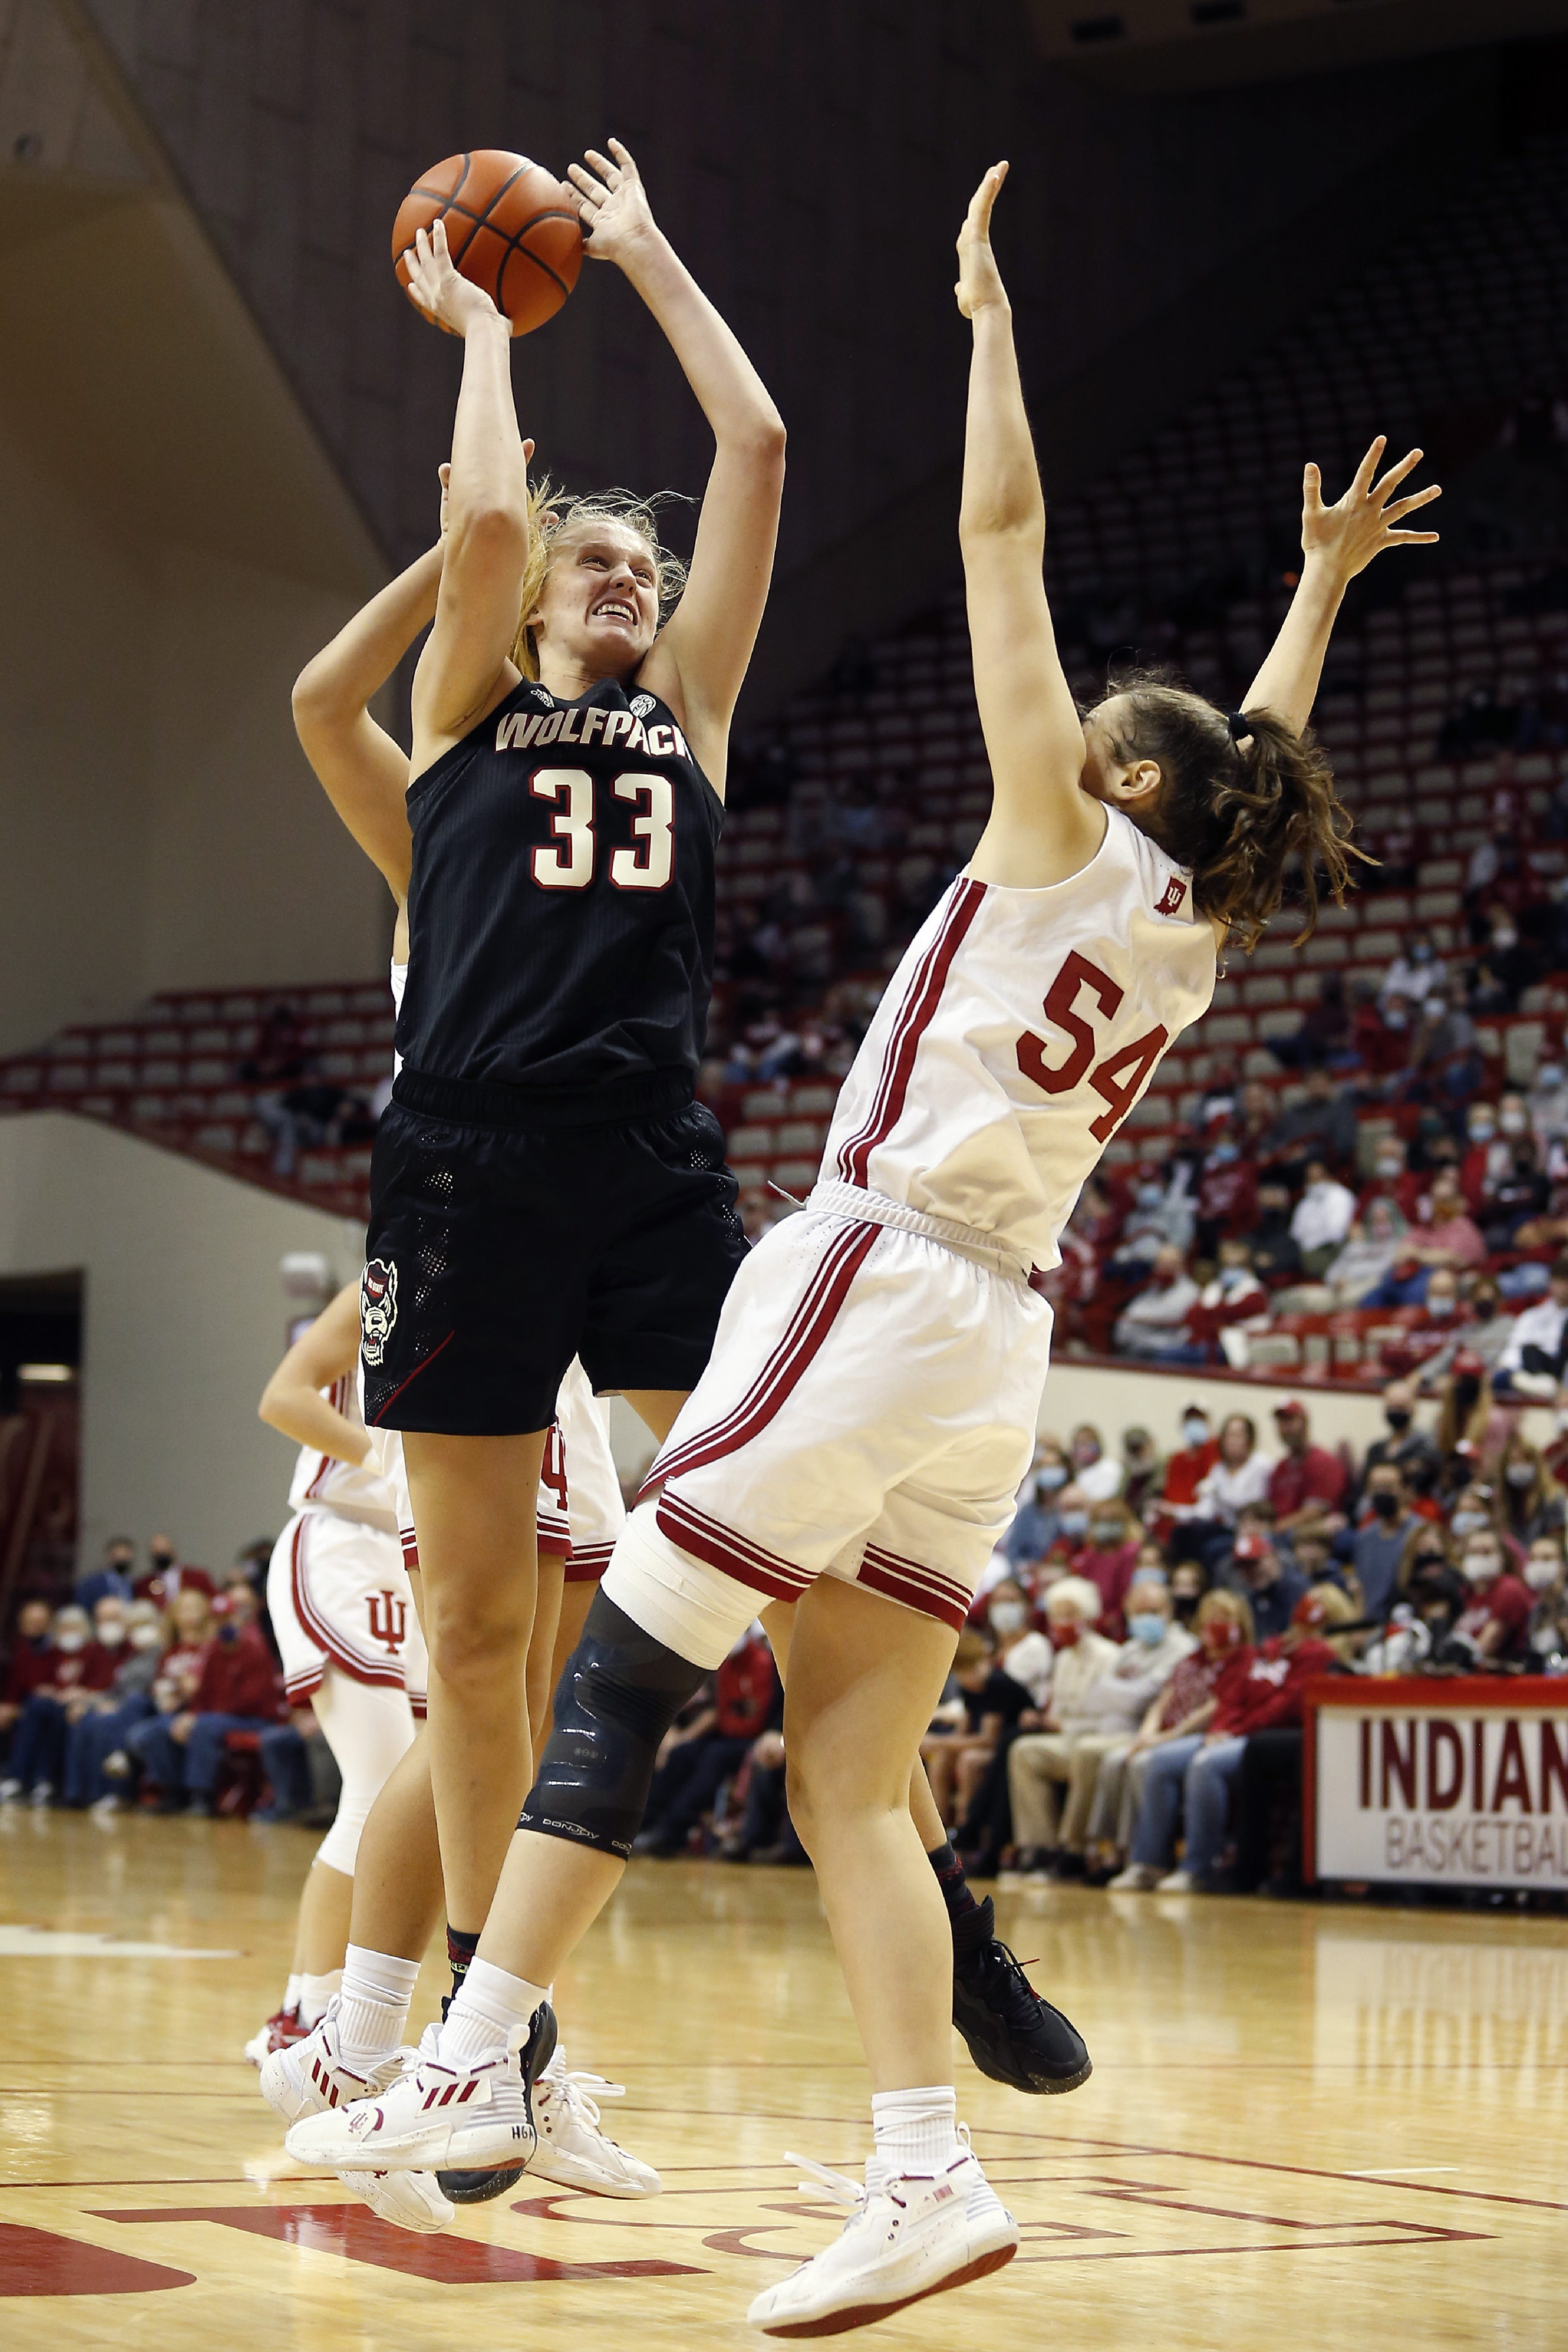 COLLEGE BASKETBALL: DEC 02 Women’s - NC State at Indiana